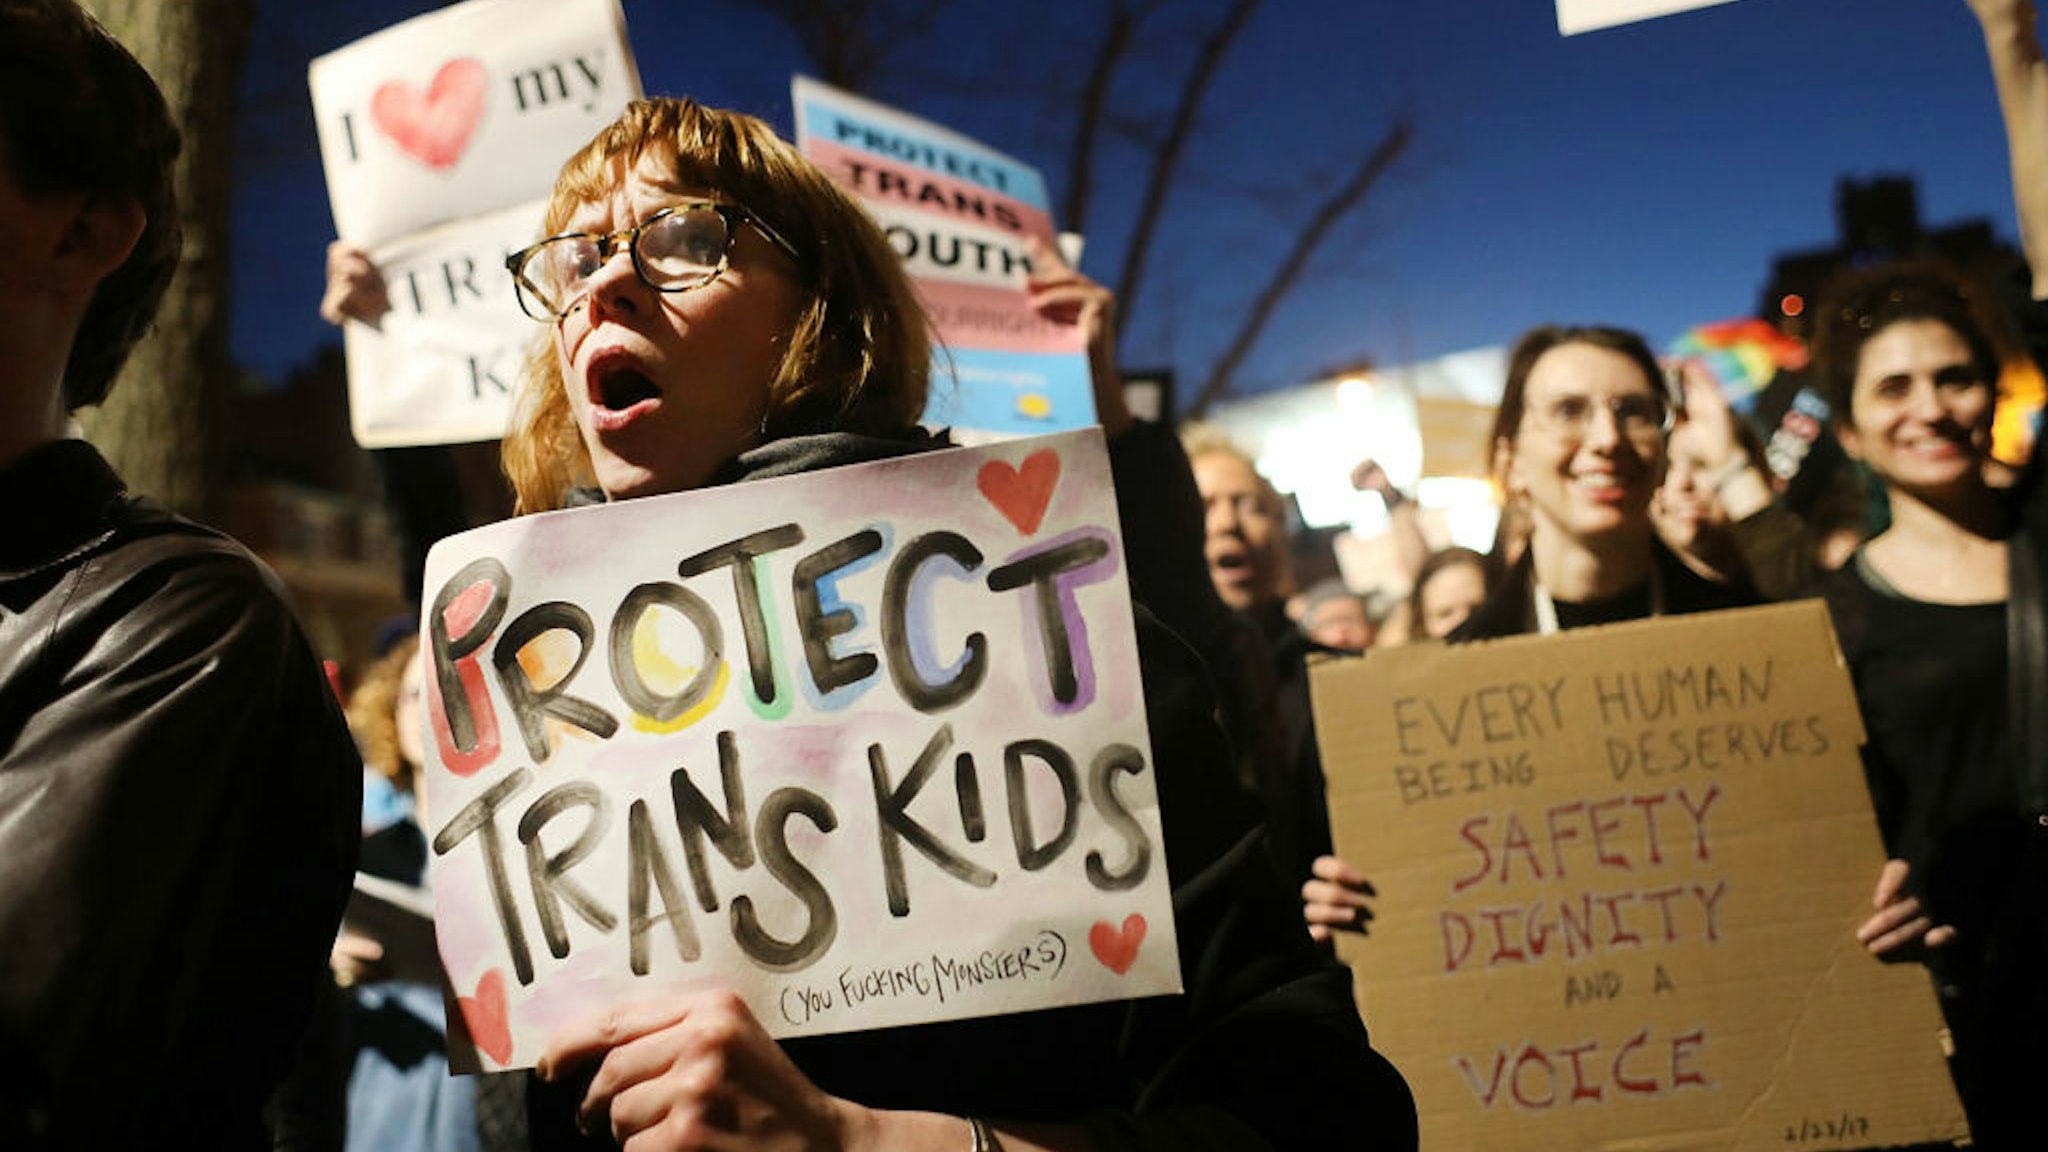 NEW YORK, NY - FEBRUARY 23: Hundreds protest a Trump administration announcement this week that rescinds an Obama-era order allowing transgender students to use school bathrooms matching their gender identities, at the Stonewall Inn on February 23, 2017 in New York City. Activists and members of the transgender community gathered outside the historic LGTB bar to denounce the new policy. (Photo by Spencer Platt/Getty Images)